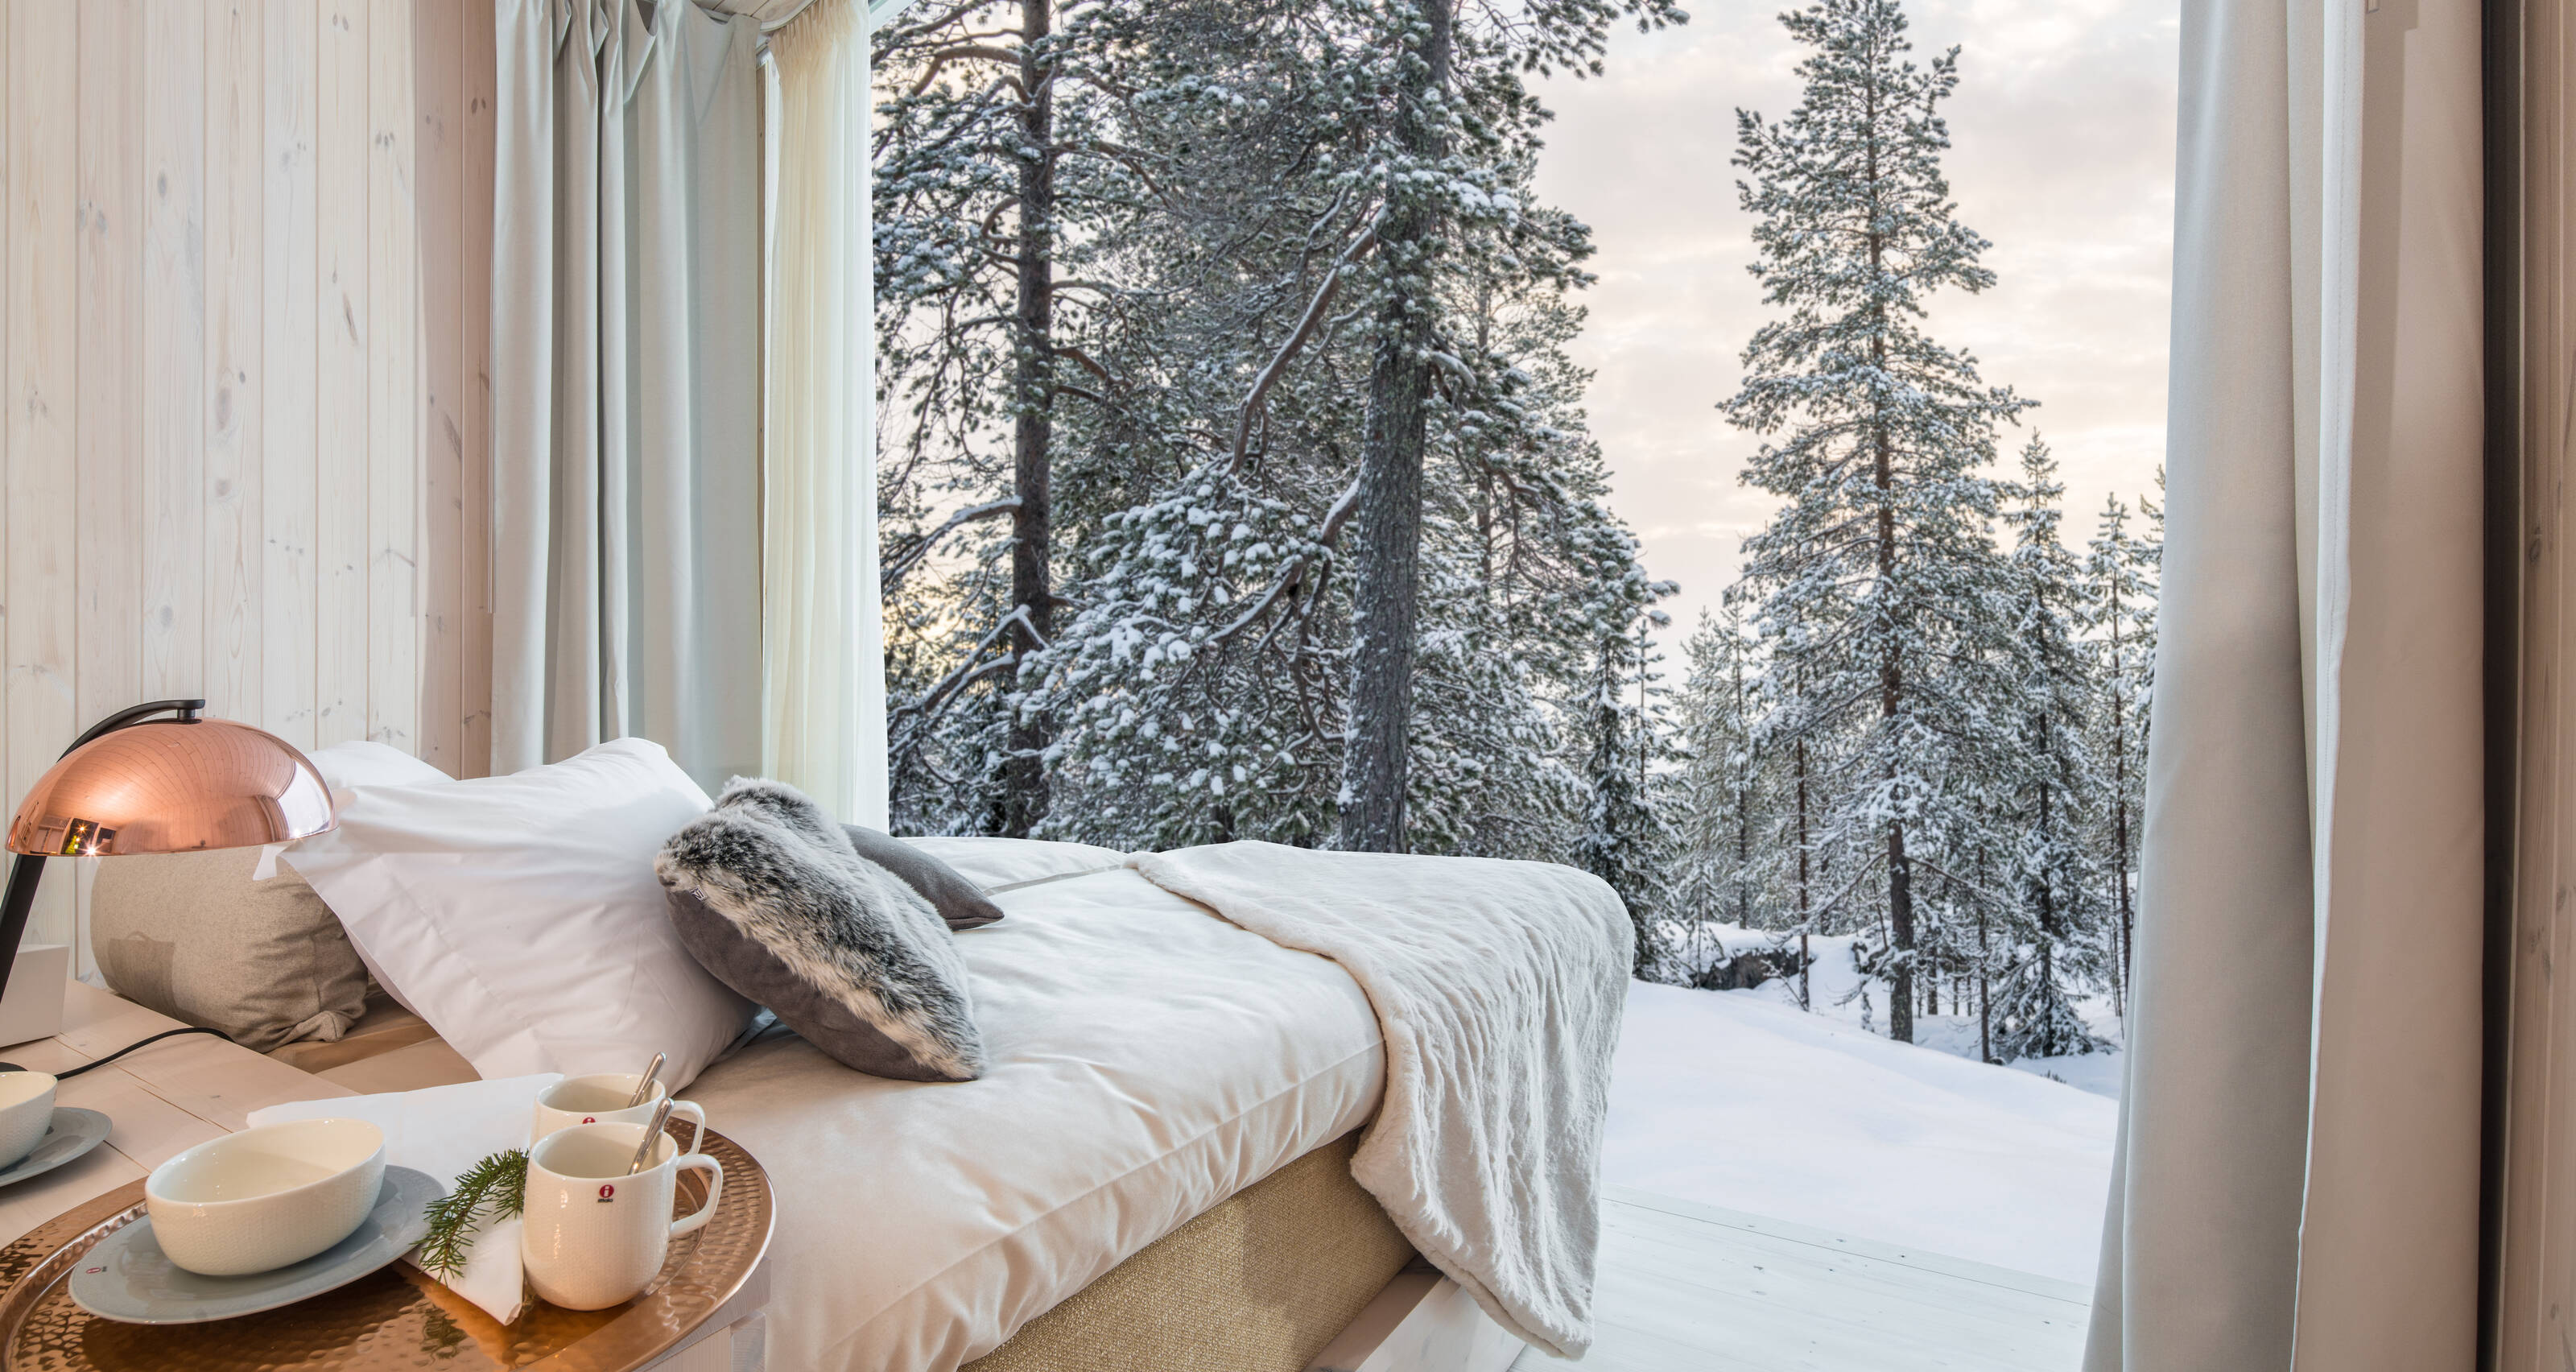 Picture of a hotel suite with a view of the Finnish winter forest